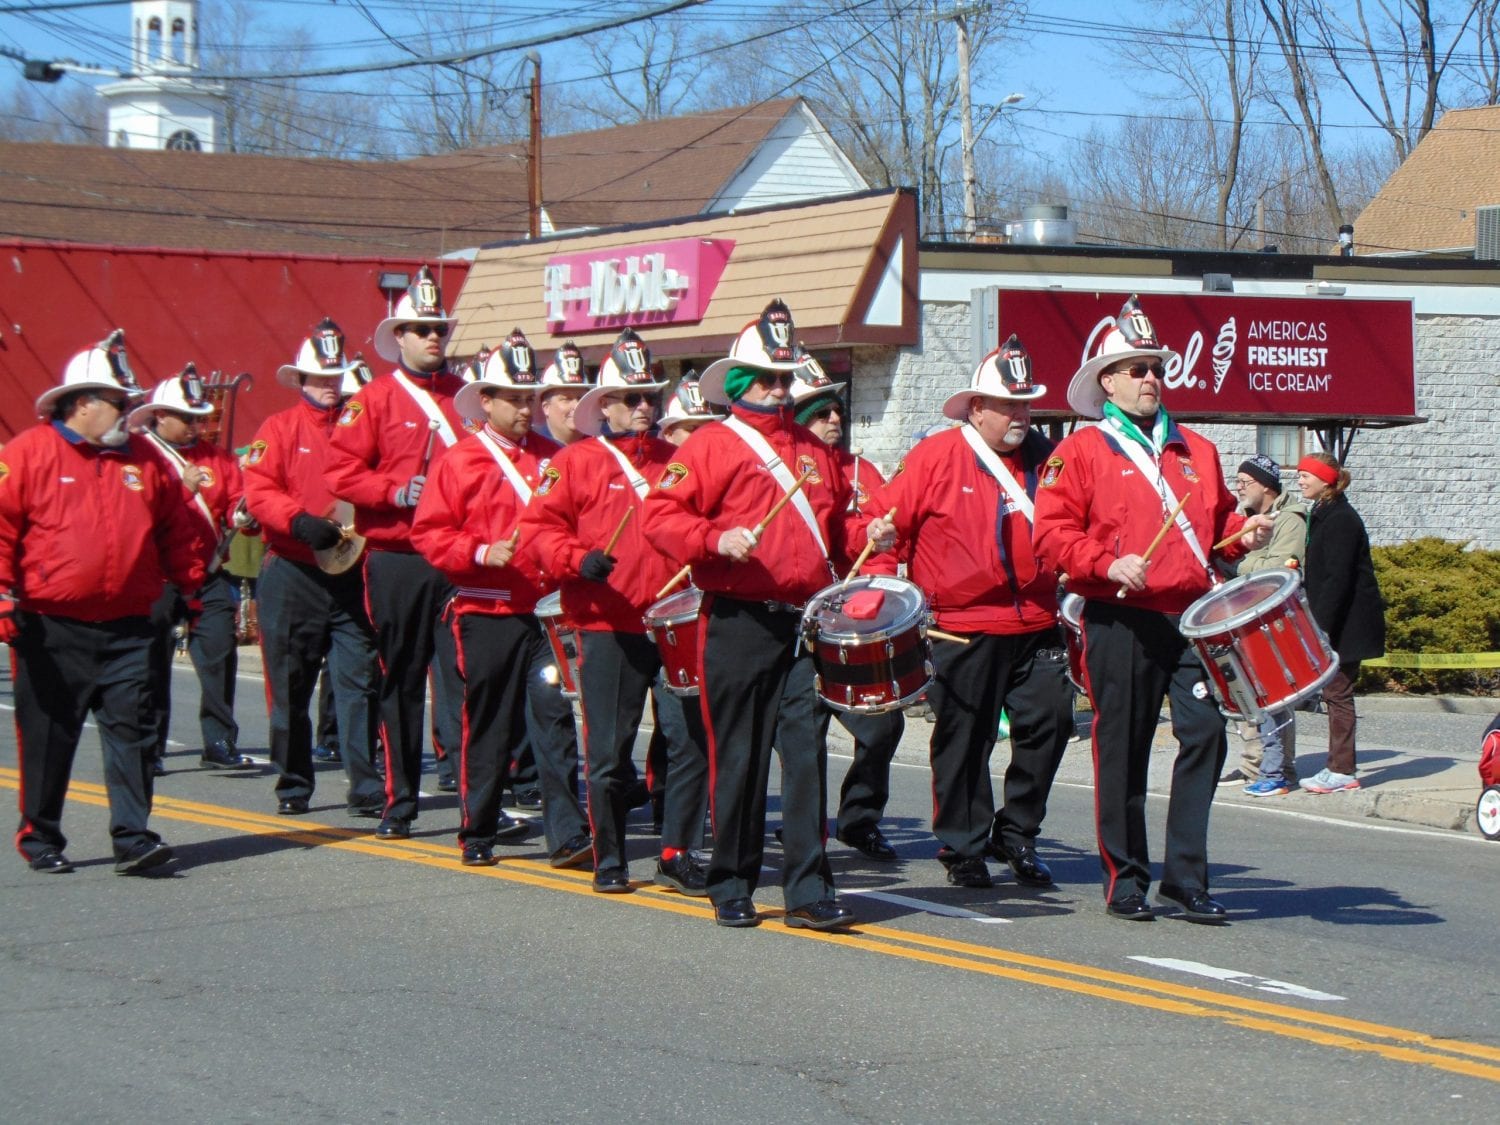 Kings Park Throws 10th Annual St. Patrick’s Day Parade TBR News Media